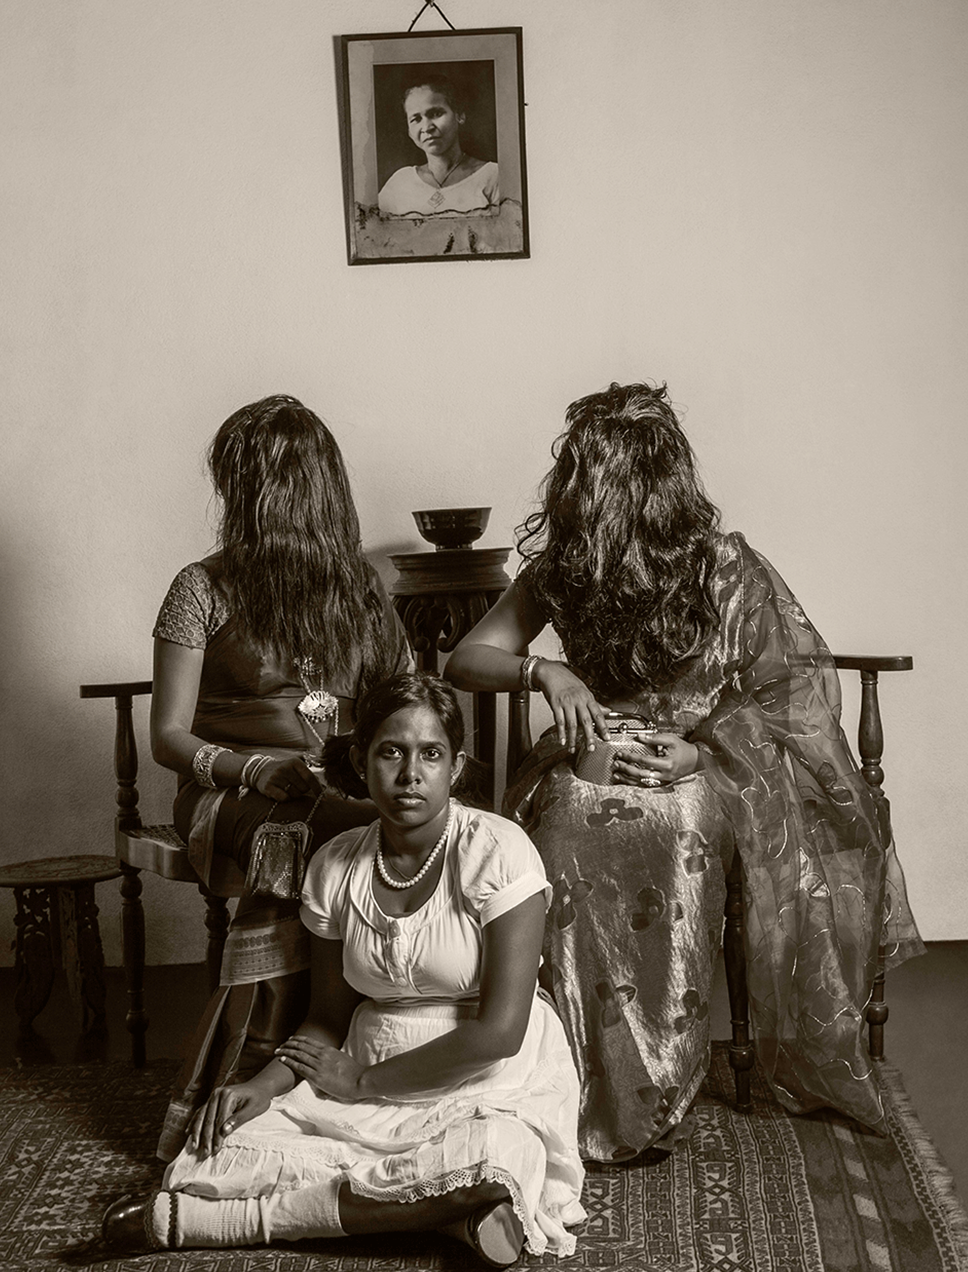 A woman in a dress sits cross legged on a carpet. Behind her are two saree-clad women seated on chairs, with their hair completely covering their faces. 